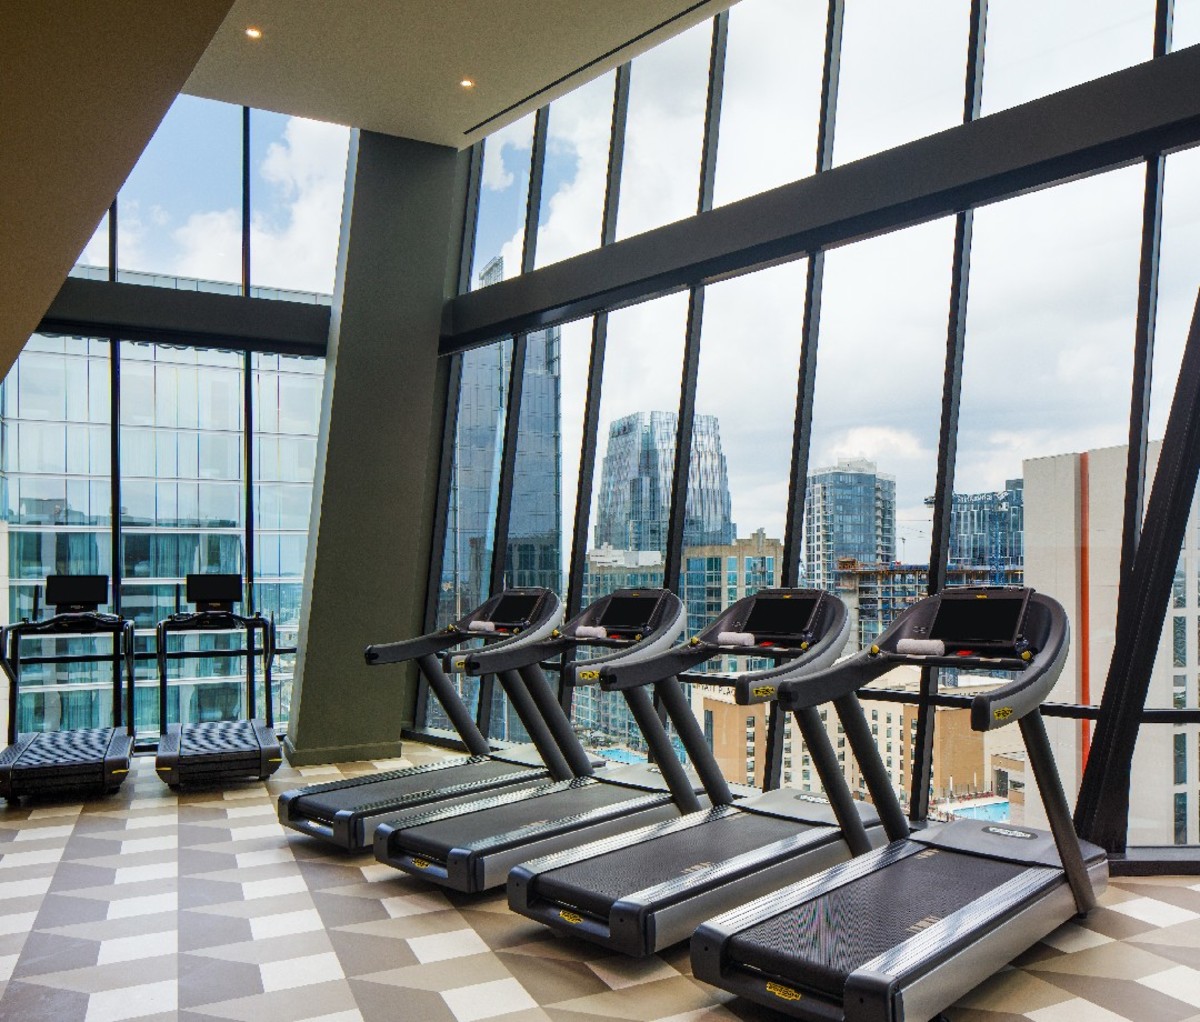 Best Gym Membership - Top-Rated Fitness Centers & Health Clubs